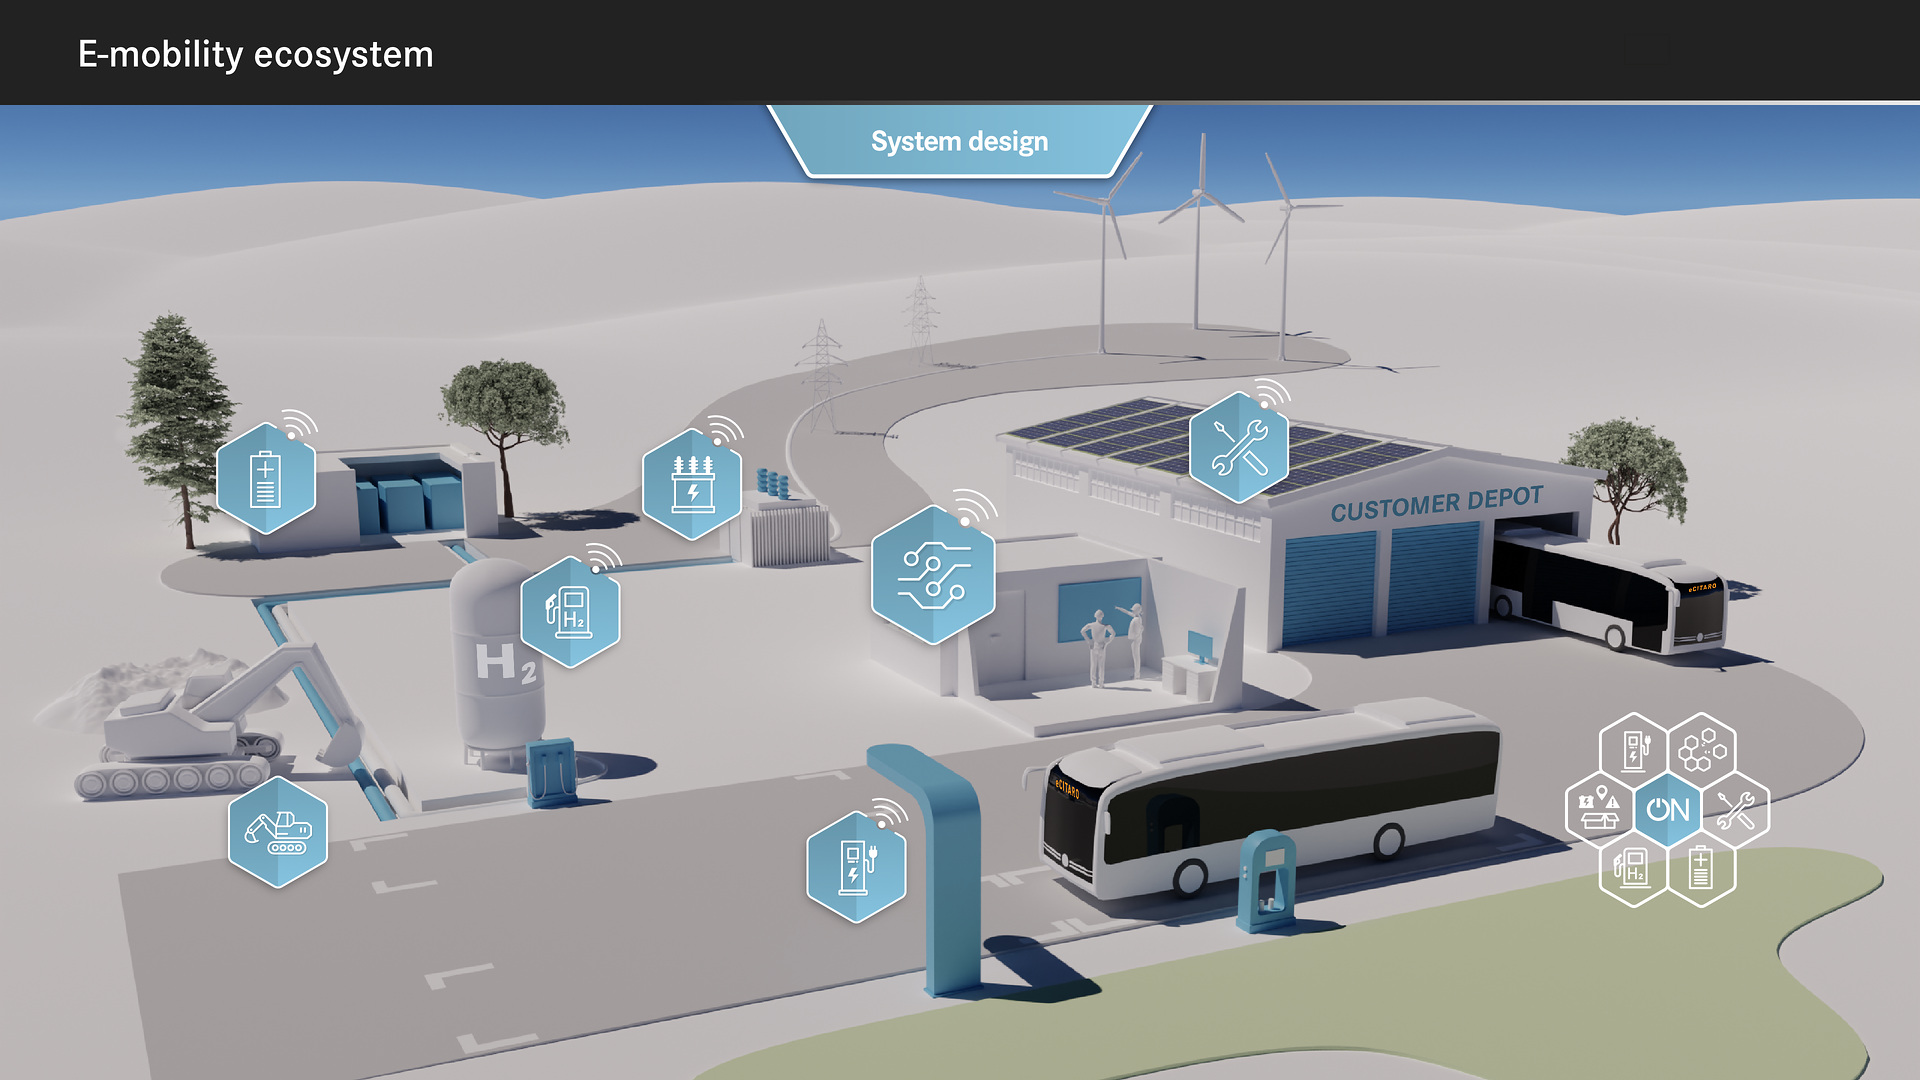 Daimler Buses drives business with its turnkey e-systems